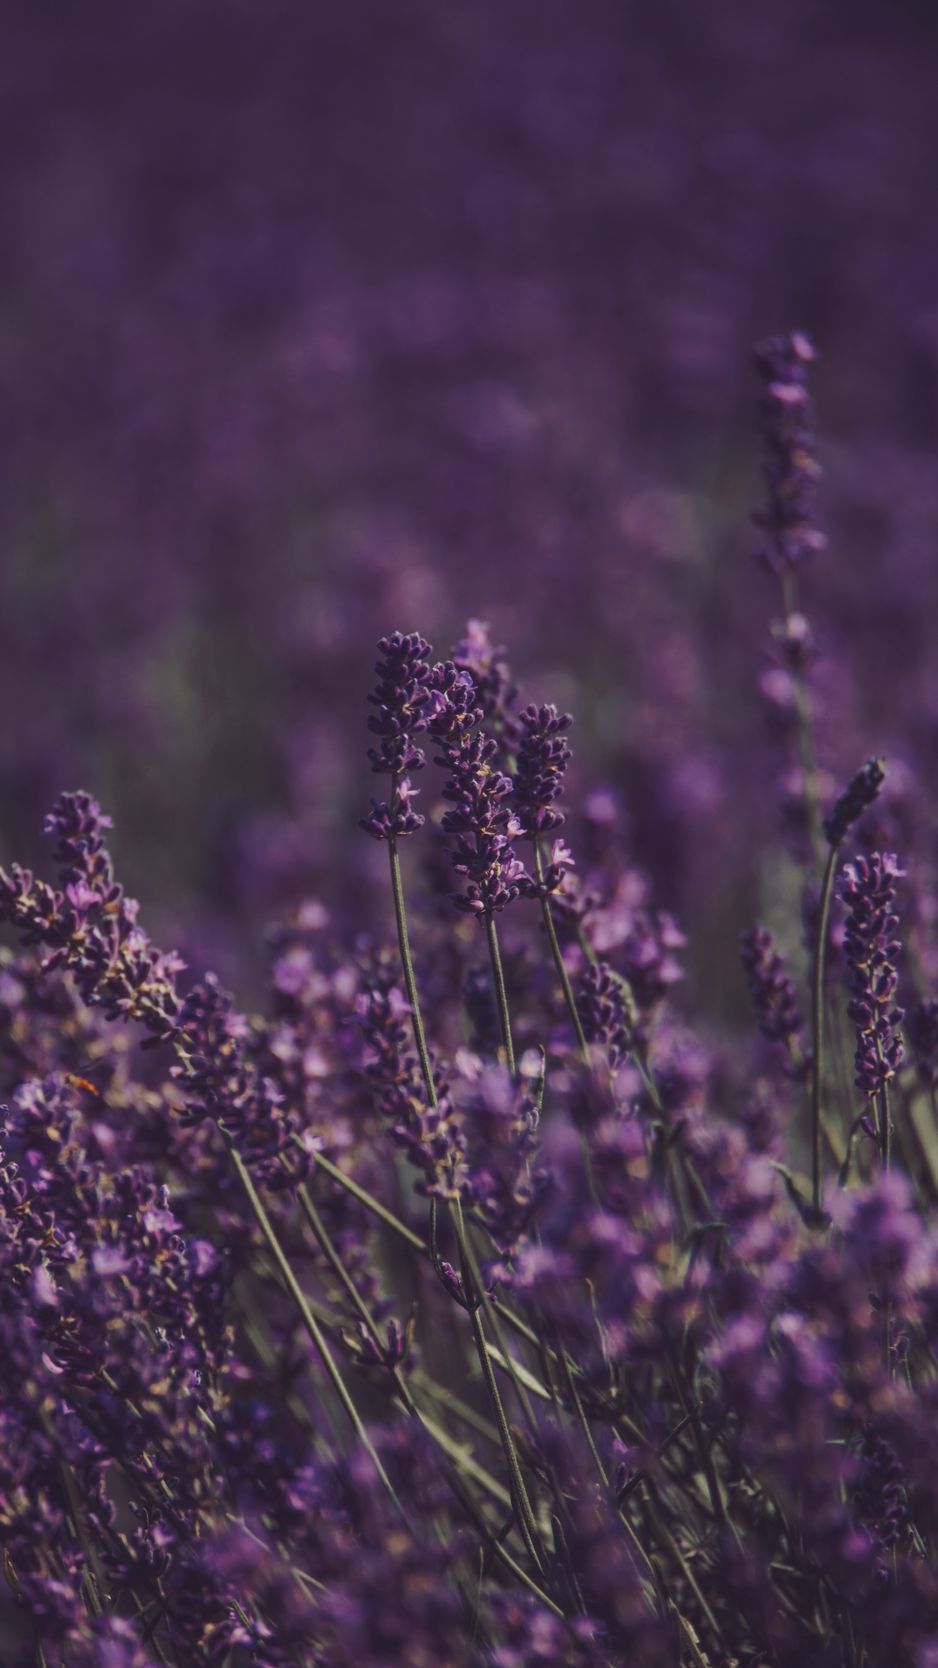 Download wallpaper 938x1668 lavender, flowers, field, purple, bloom iphone  8/7/6s/6 for parallax hd background